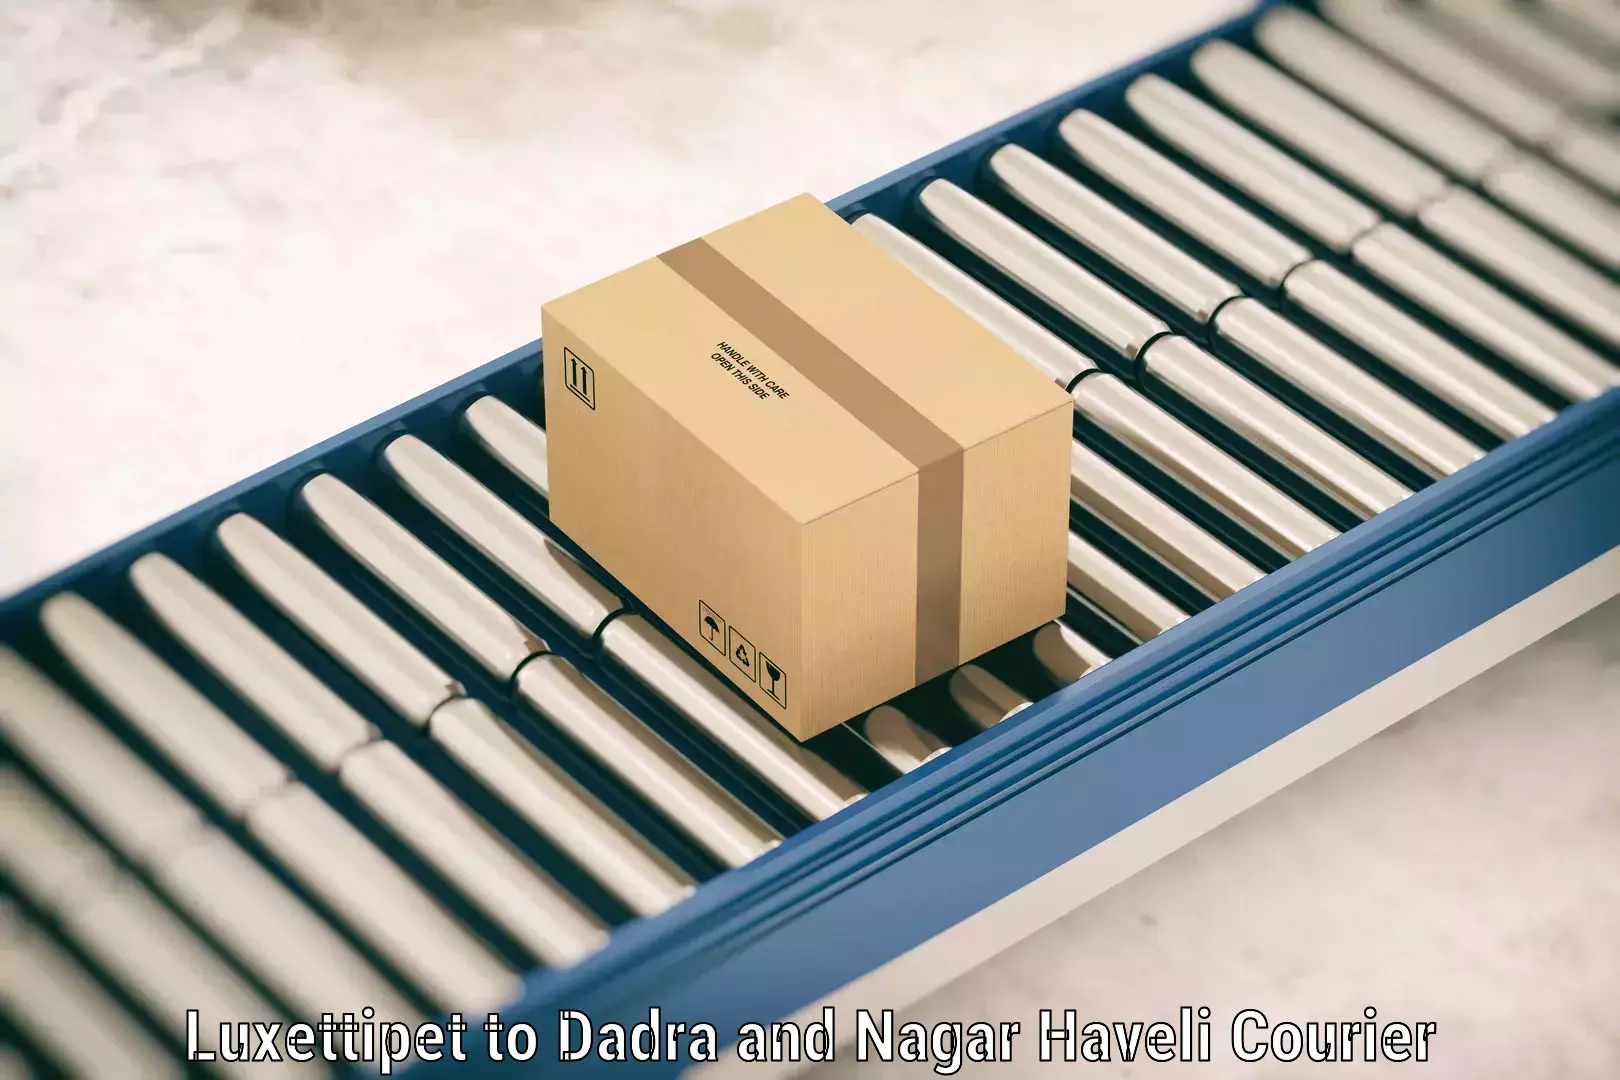 Express baggage shipping in Luxettipet to Dadra and Nagar Haveli